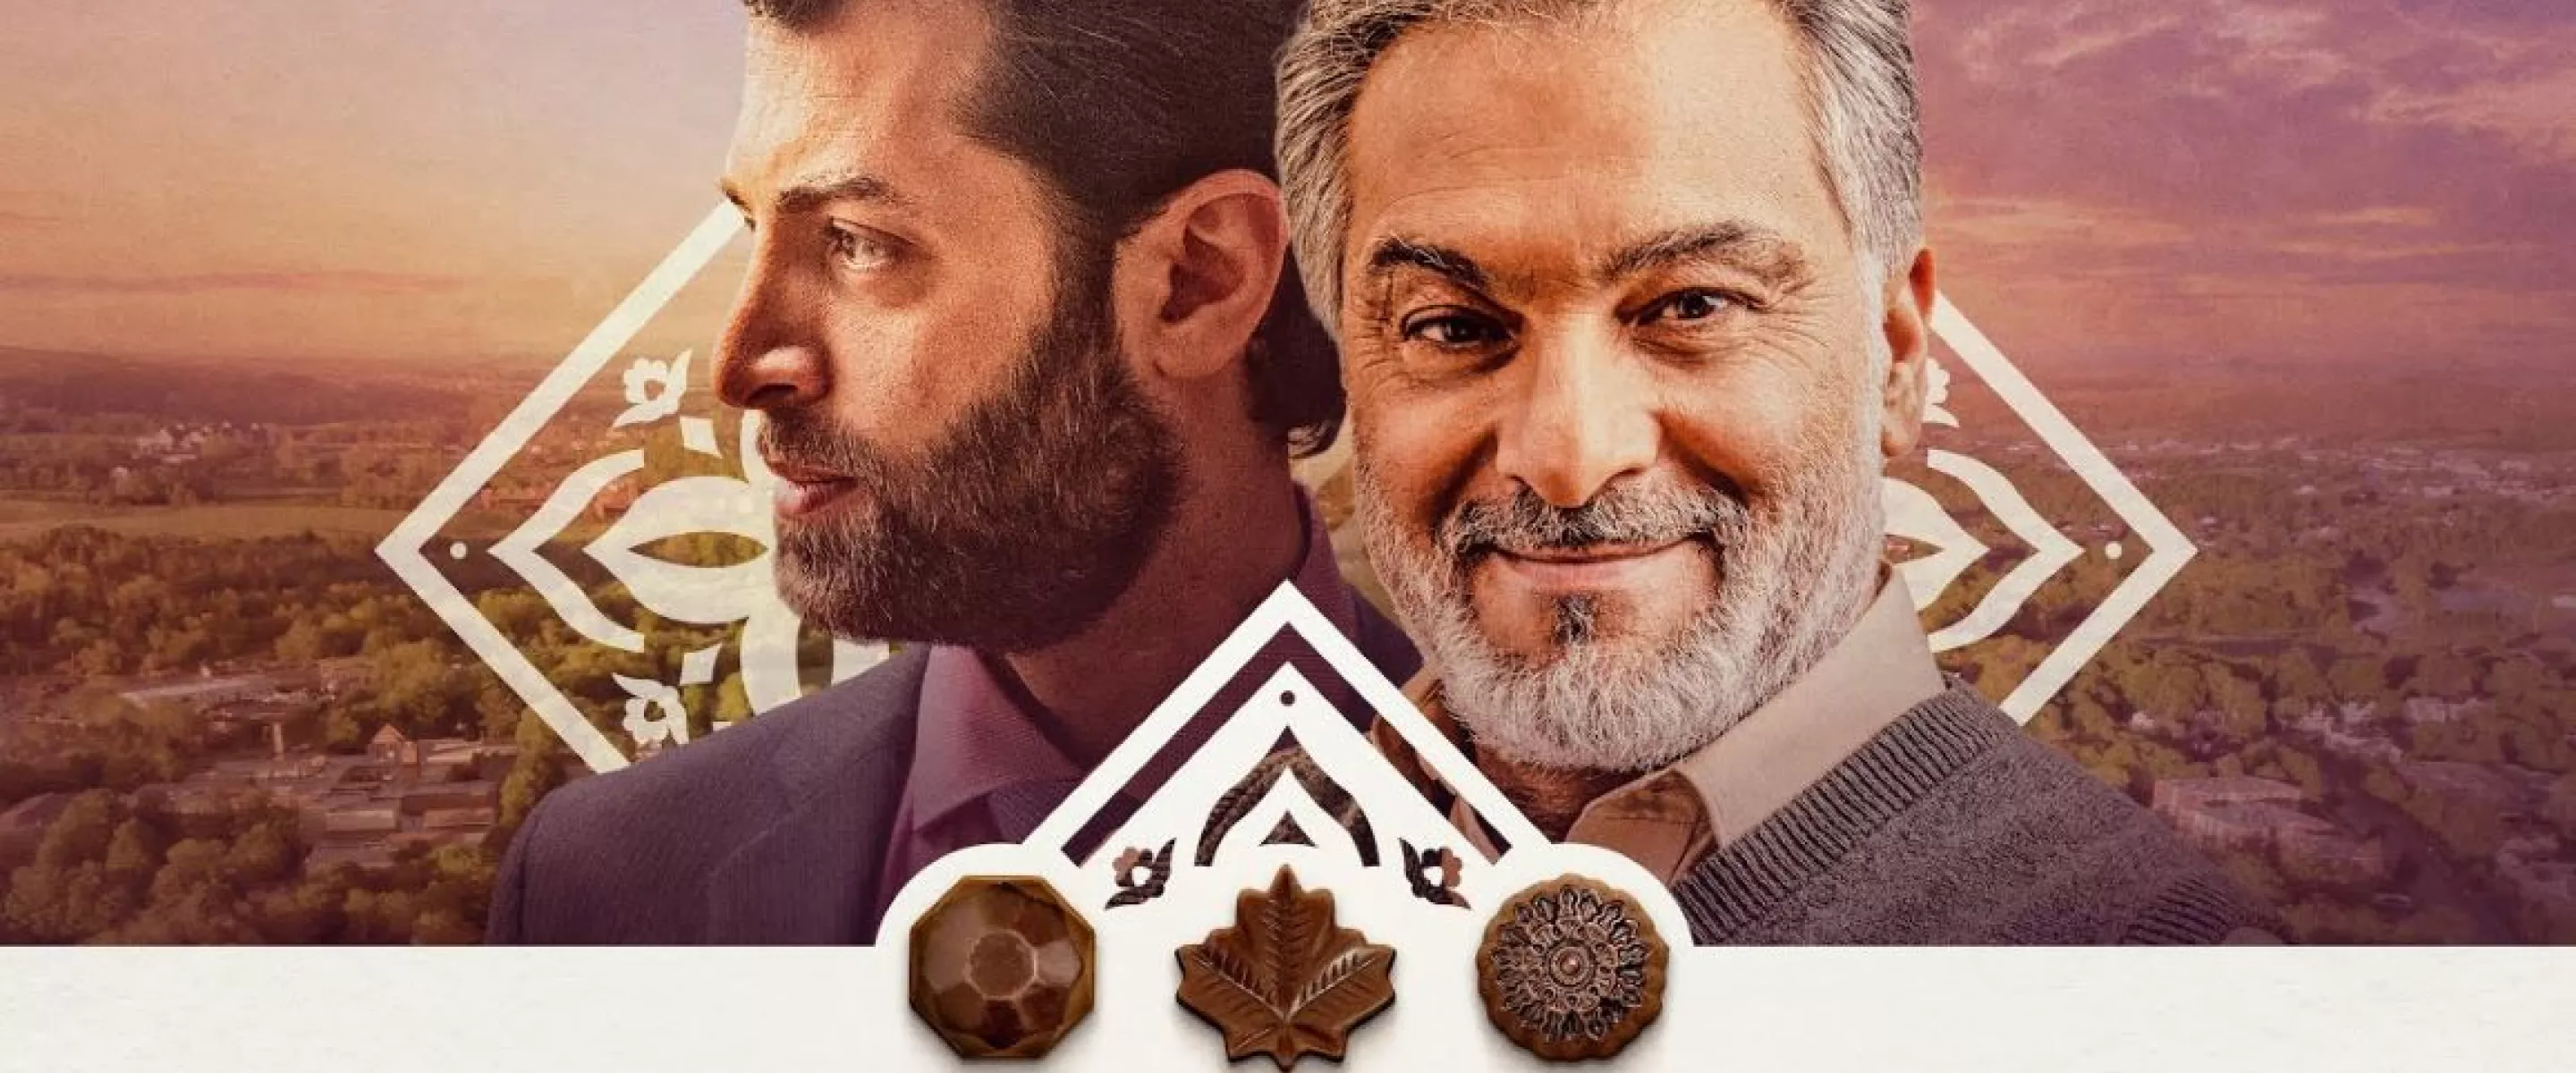 The faces of two older men, one front profile and one side profile. Both men are bearded and one has grey hair. Three chocolate shapes appear beneath their faces.